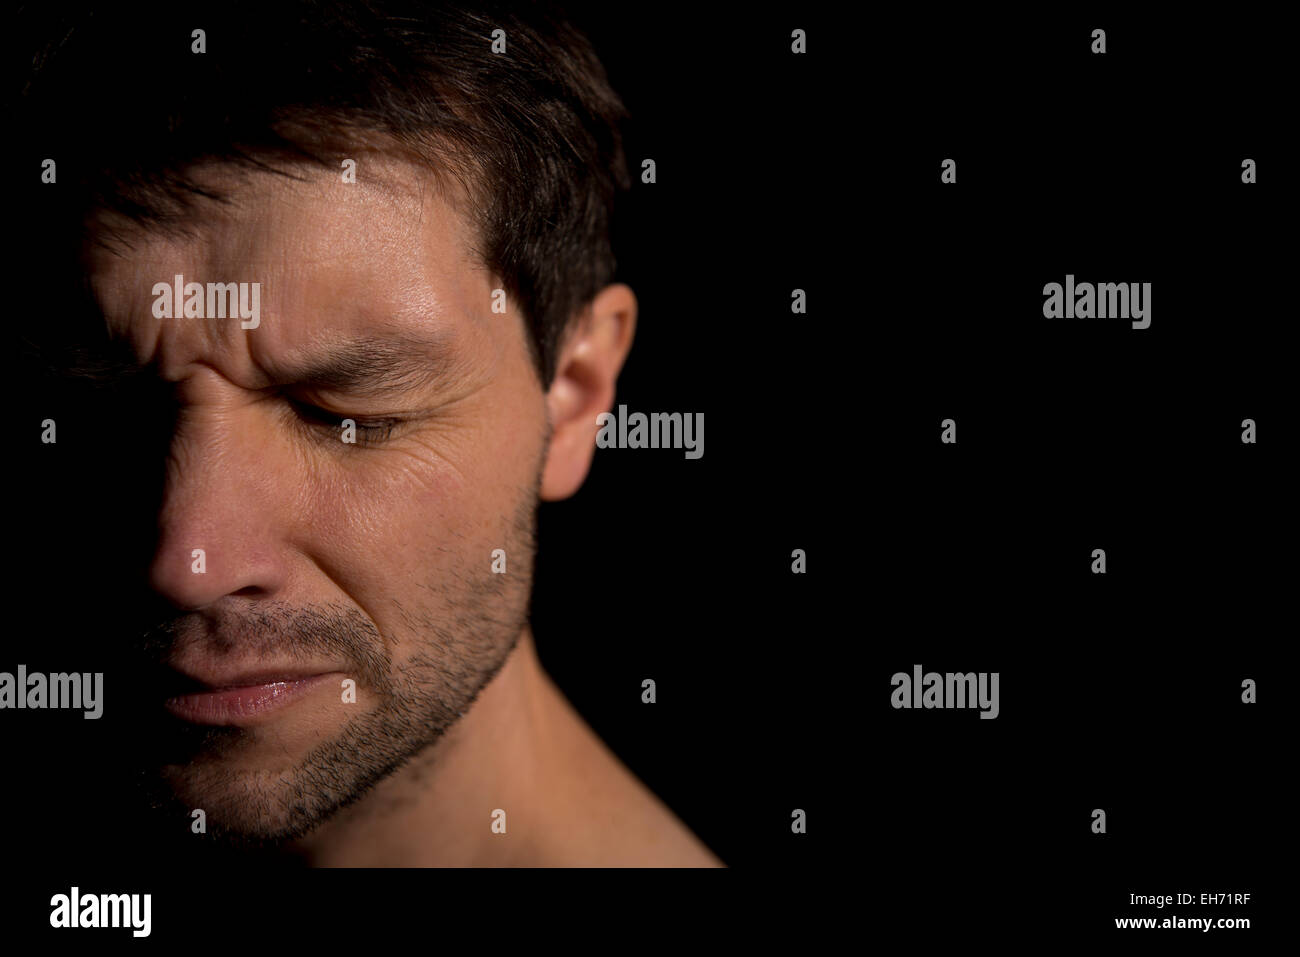 Close up portrait of an unshaven man, with his eyes closed tight and suffering with emotional pain. Stock Photo